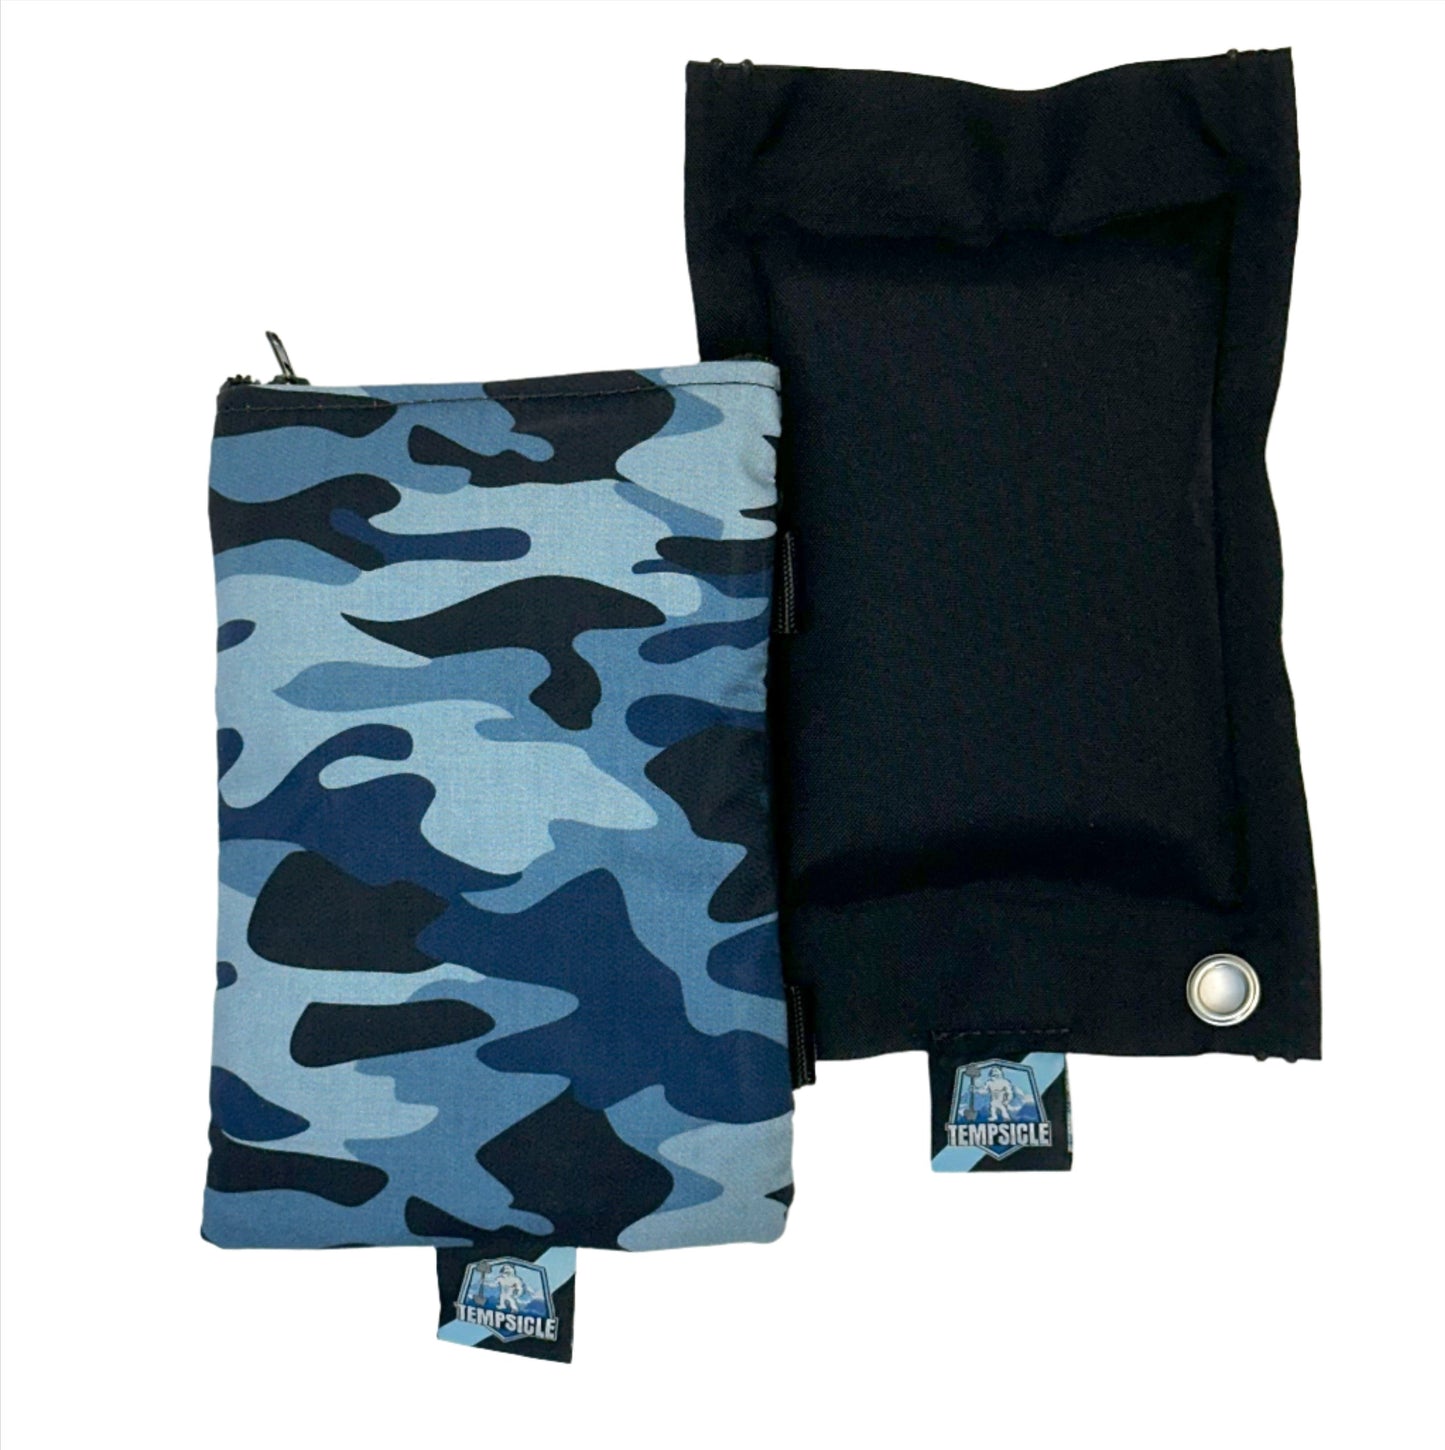 Tempsicle™ Palm Cooling Glove Classic in Blue Camo